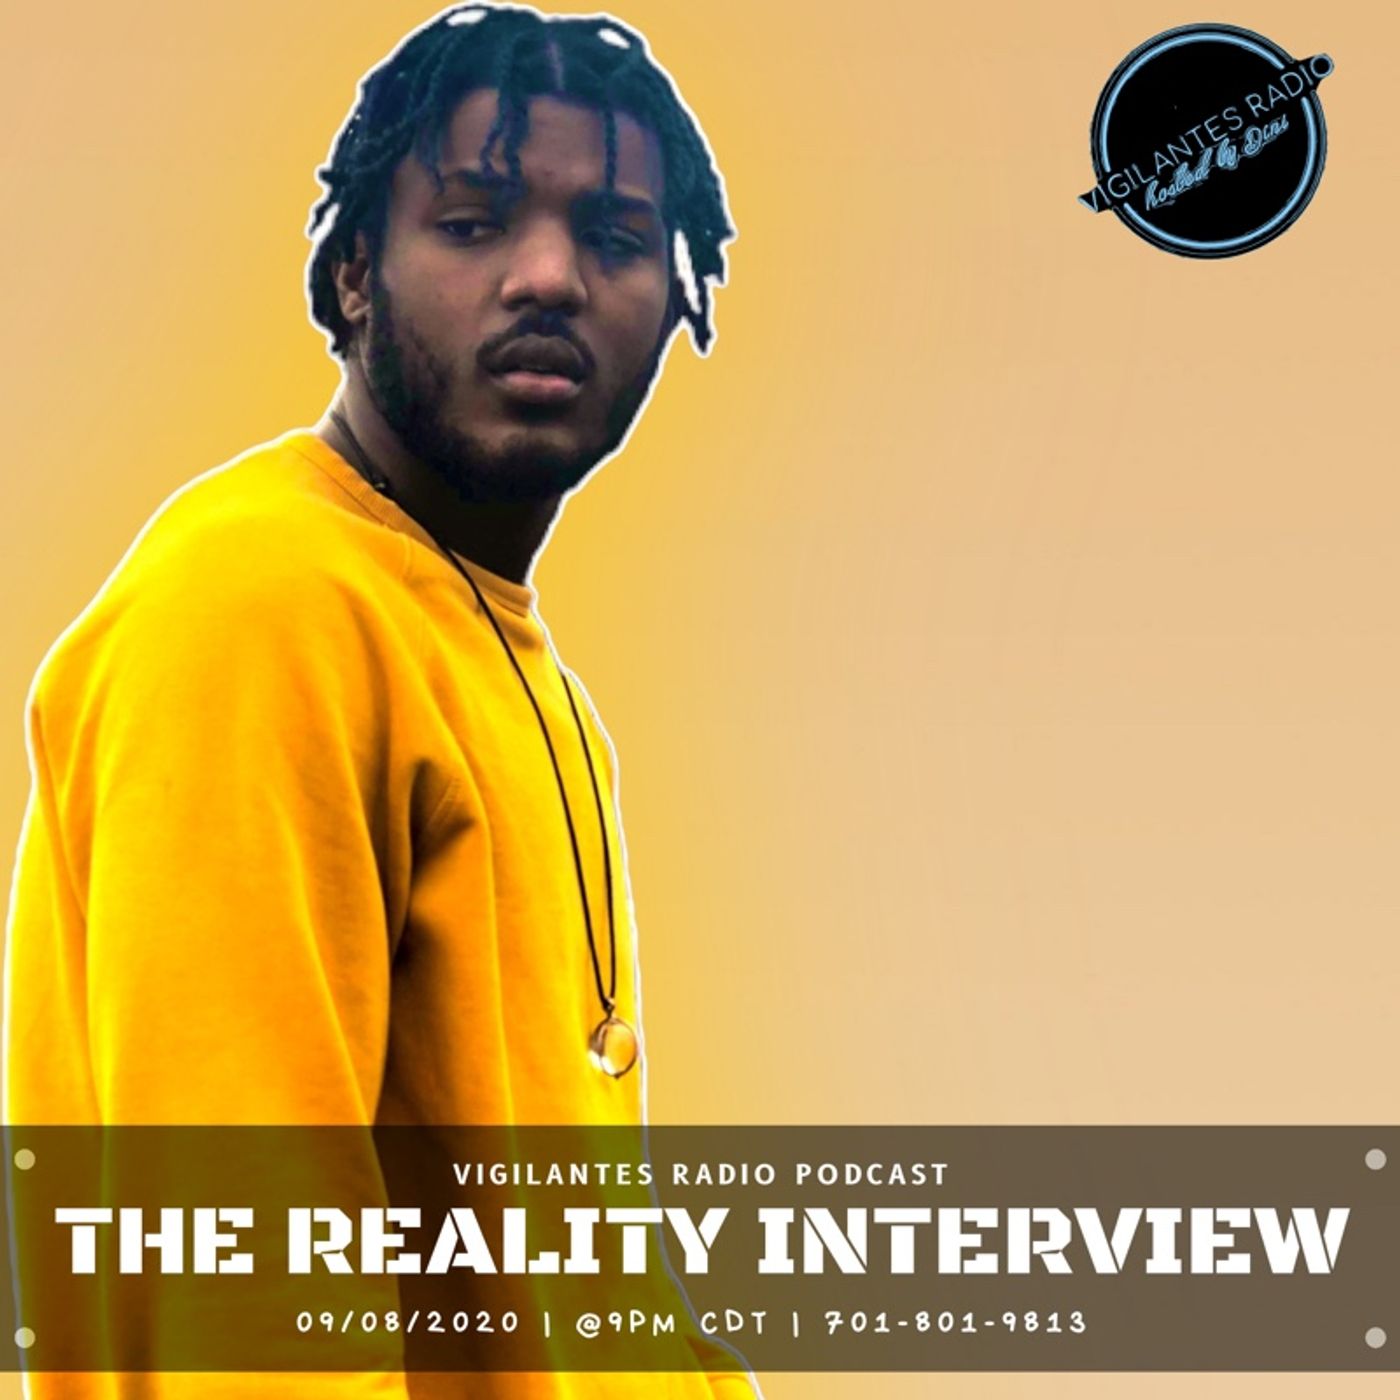 The Reality Interview. Image